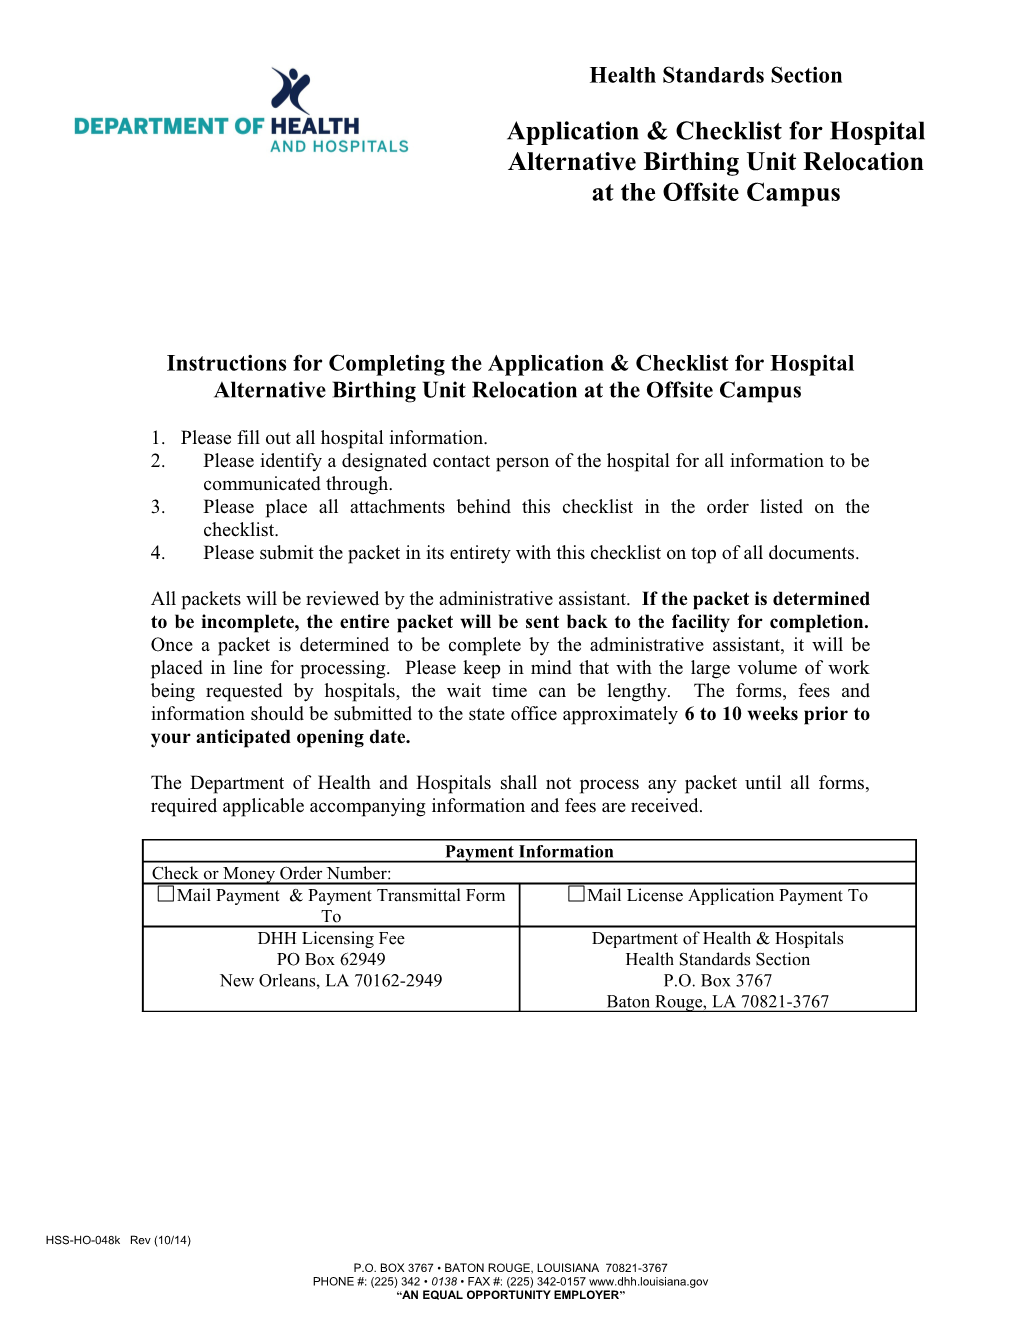 Application & Checklist for Hospital Alternative Birthing Unit Relocation at the Offsite Campus